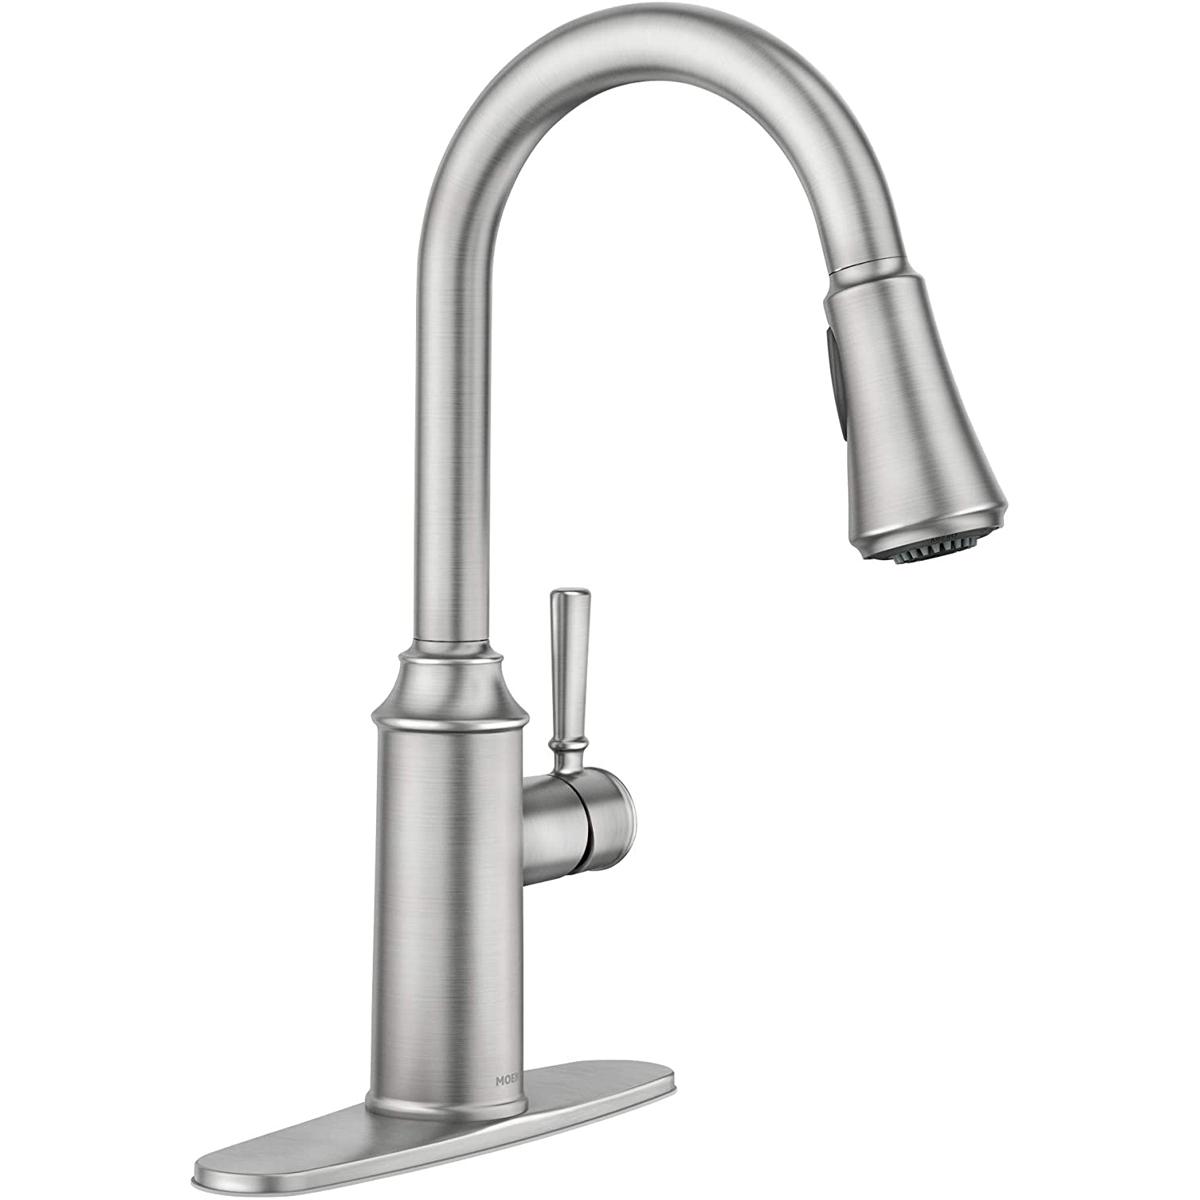 Moen Conneaut One-Handle Pulldown Kitchen Faucet for $159.81 Shipped